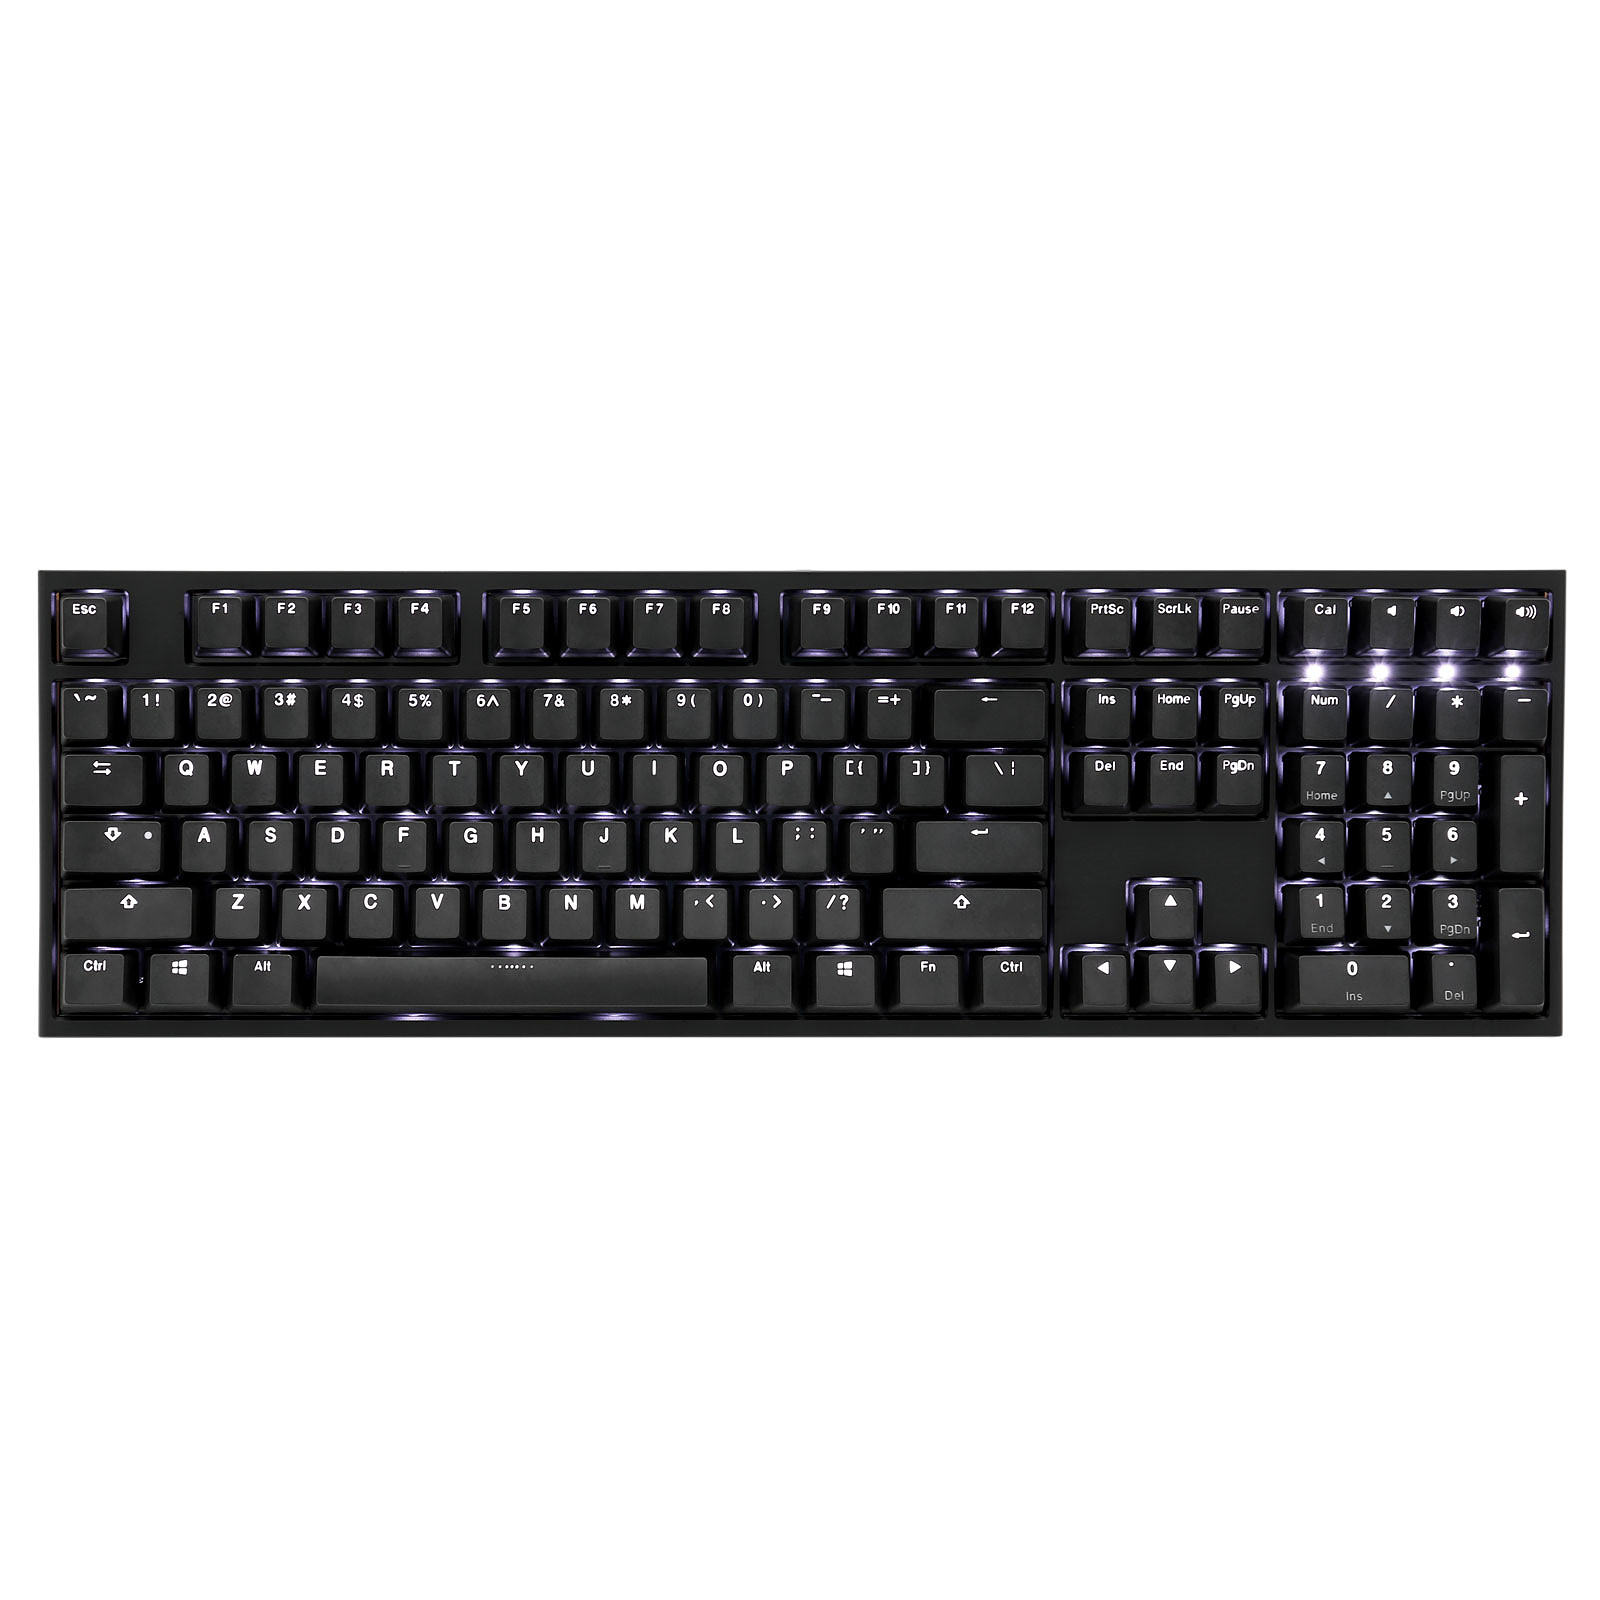 Ducky Channel One 2 Backlit (coloris noir - Cherry MX Speed Silver - LEDs blanches) - Clavier PC Ducky Channel